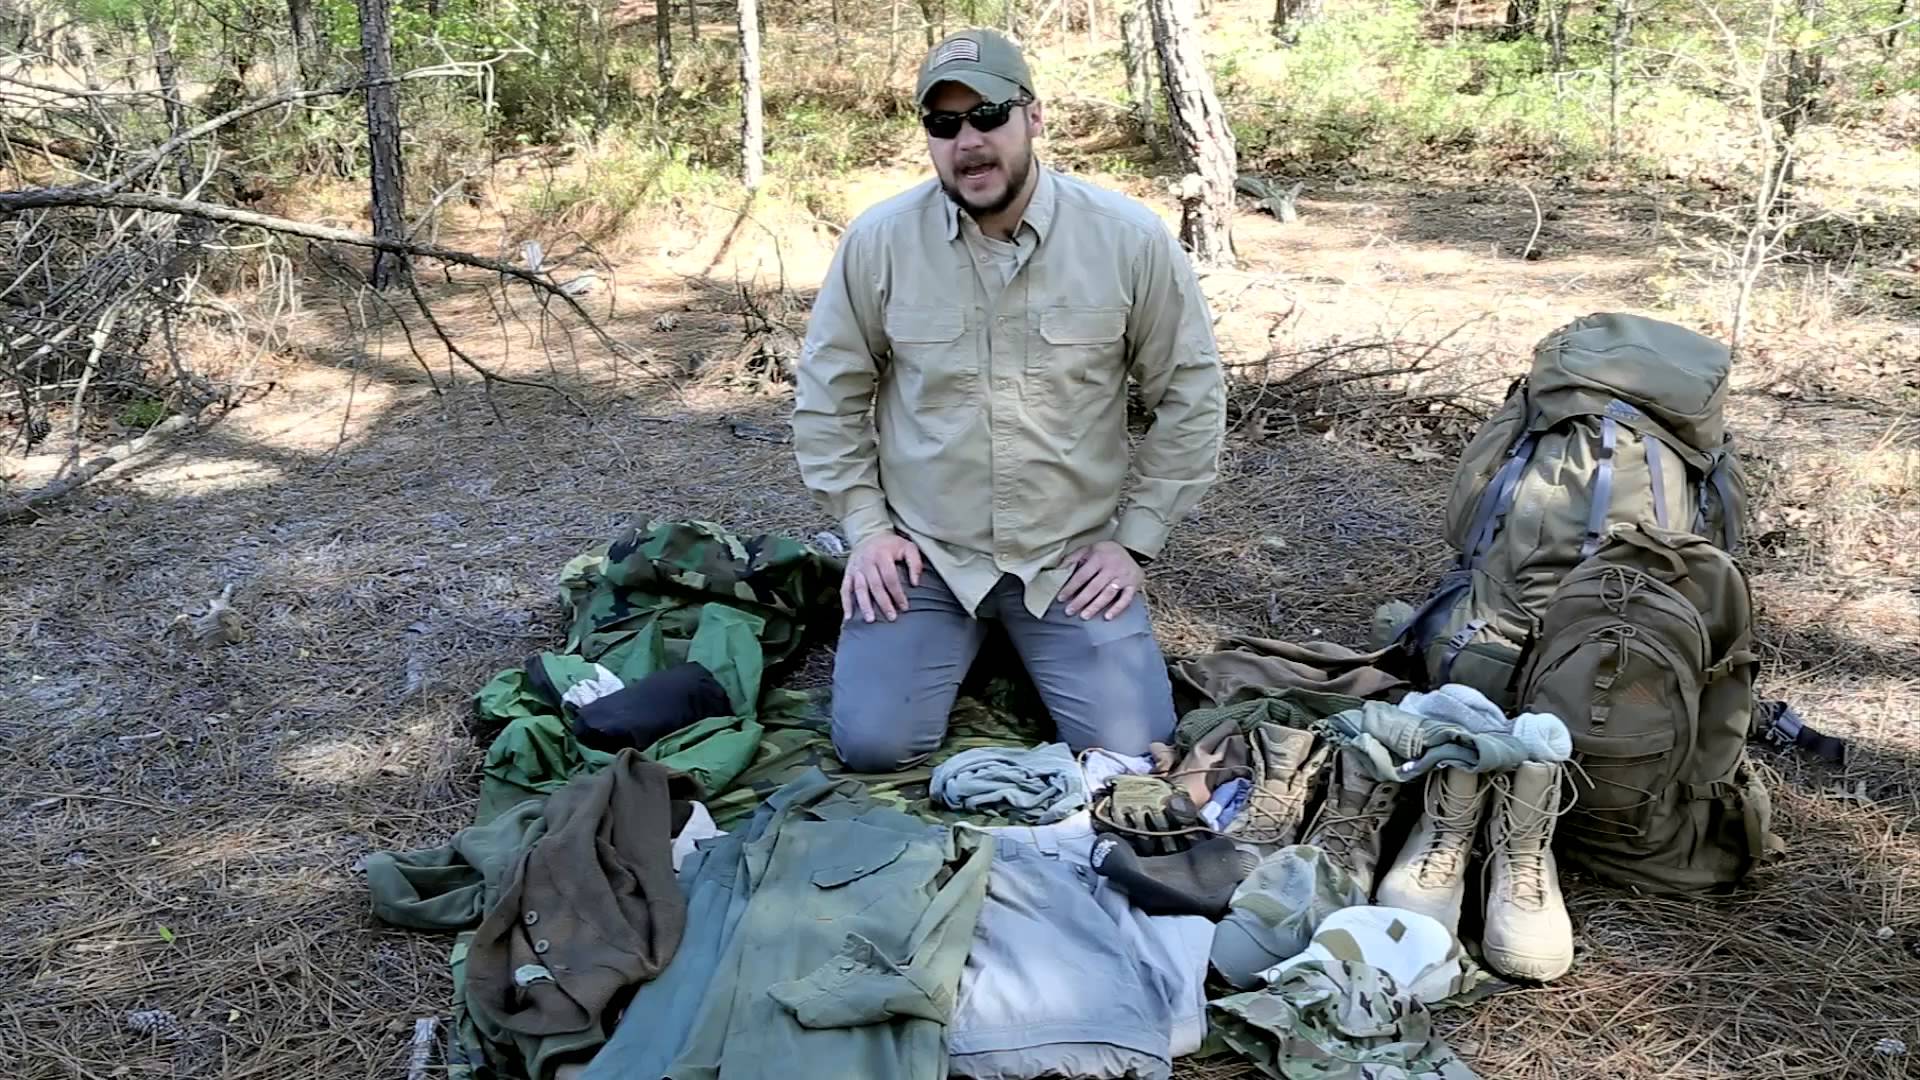 Survival Clothing